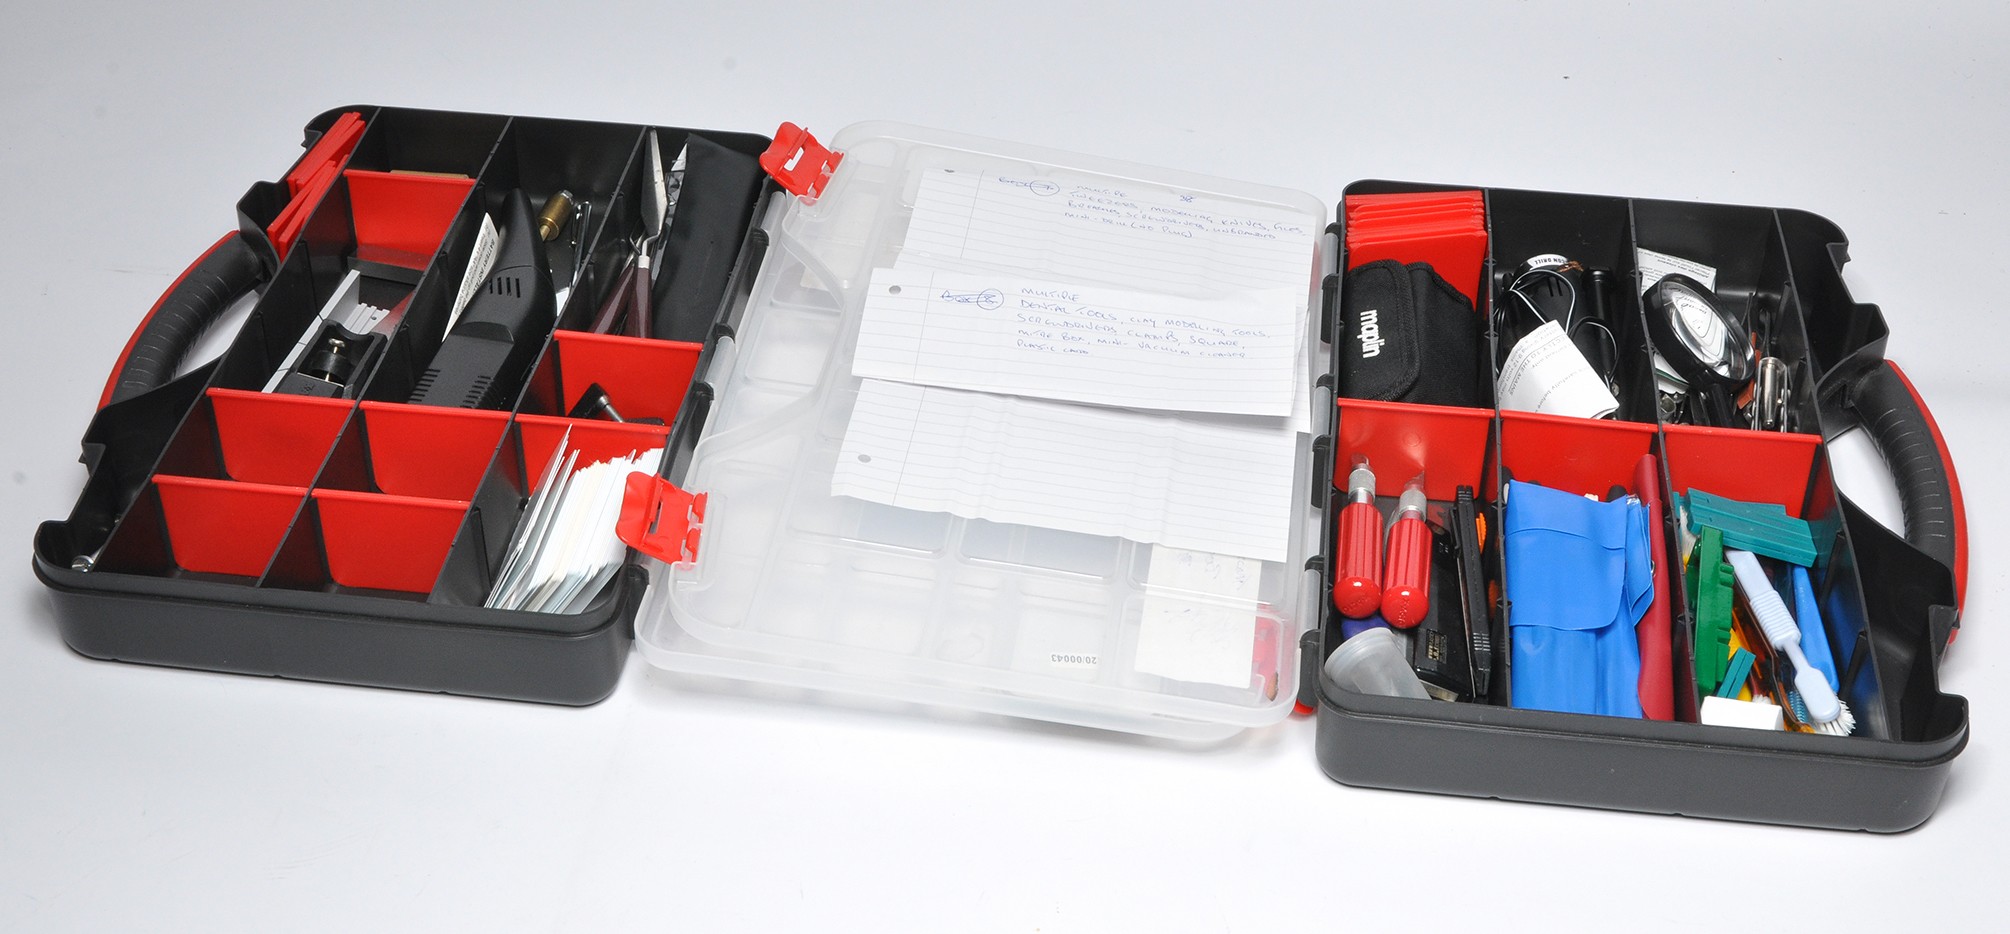 Modelling Tools and Accessories as shown, contained in two cases.